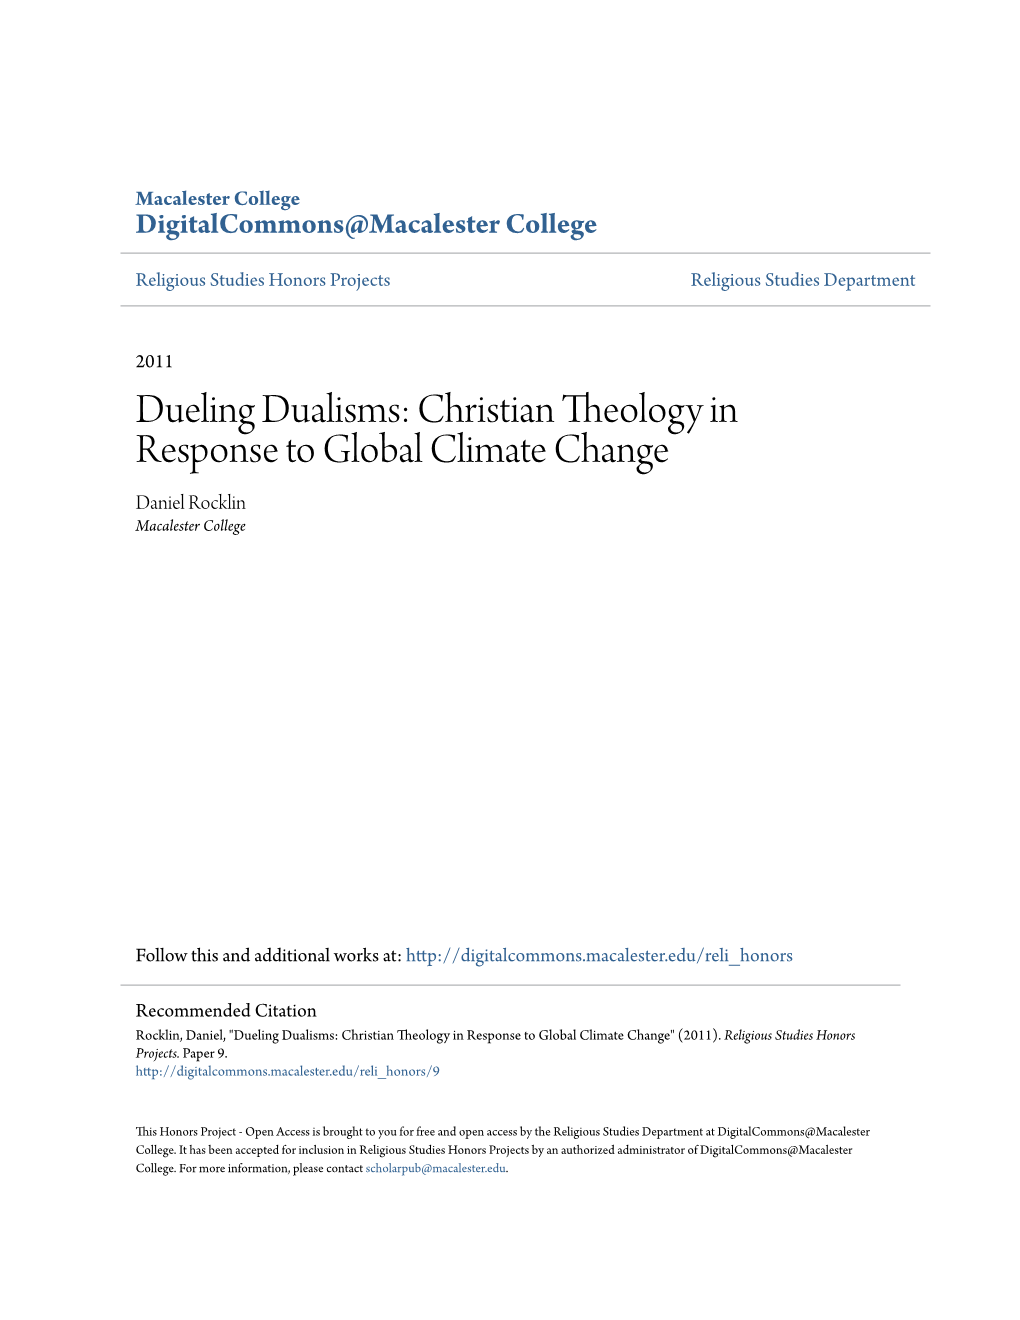 Christian Theology in Response to Global Climate Change Daniel Rocklin Macalester College